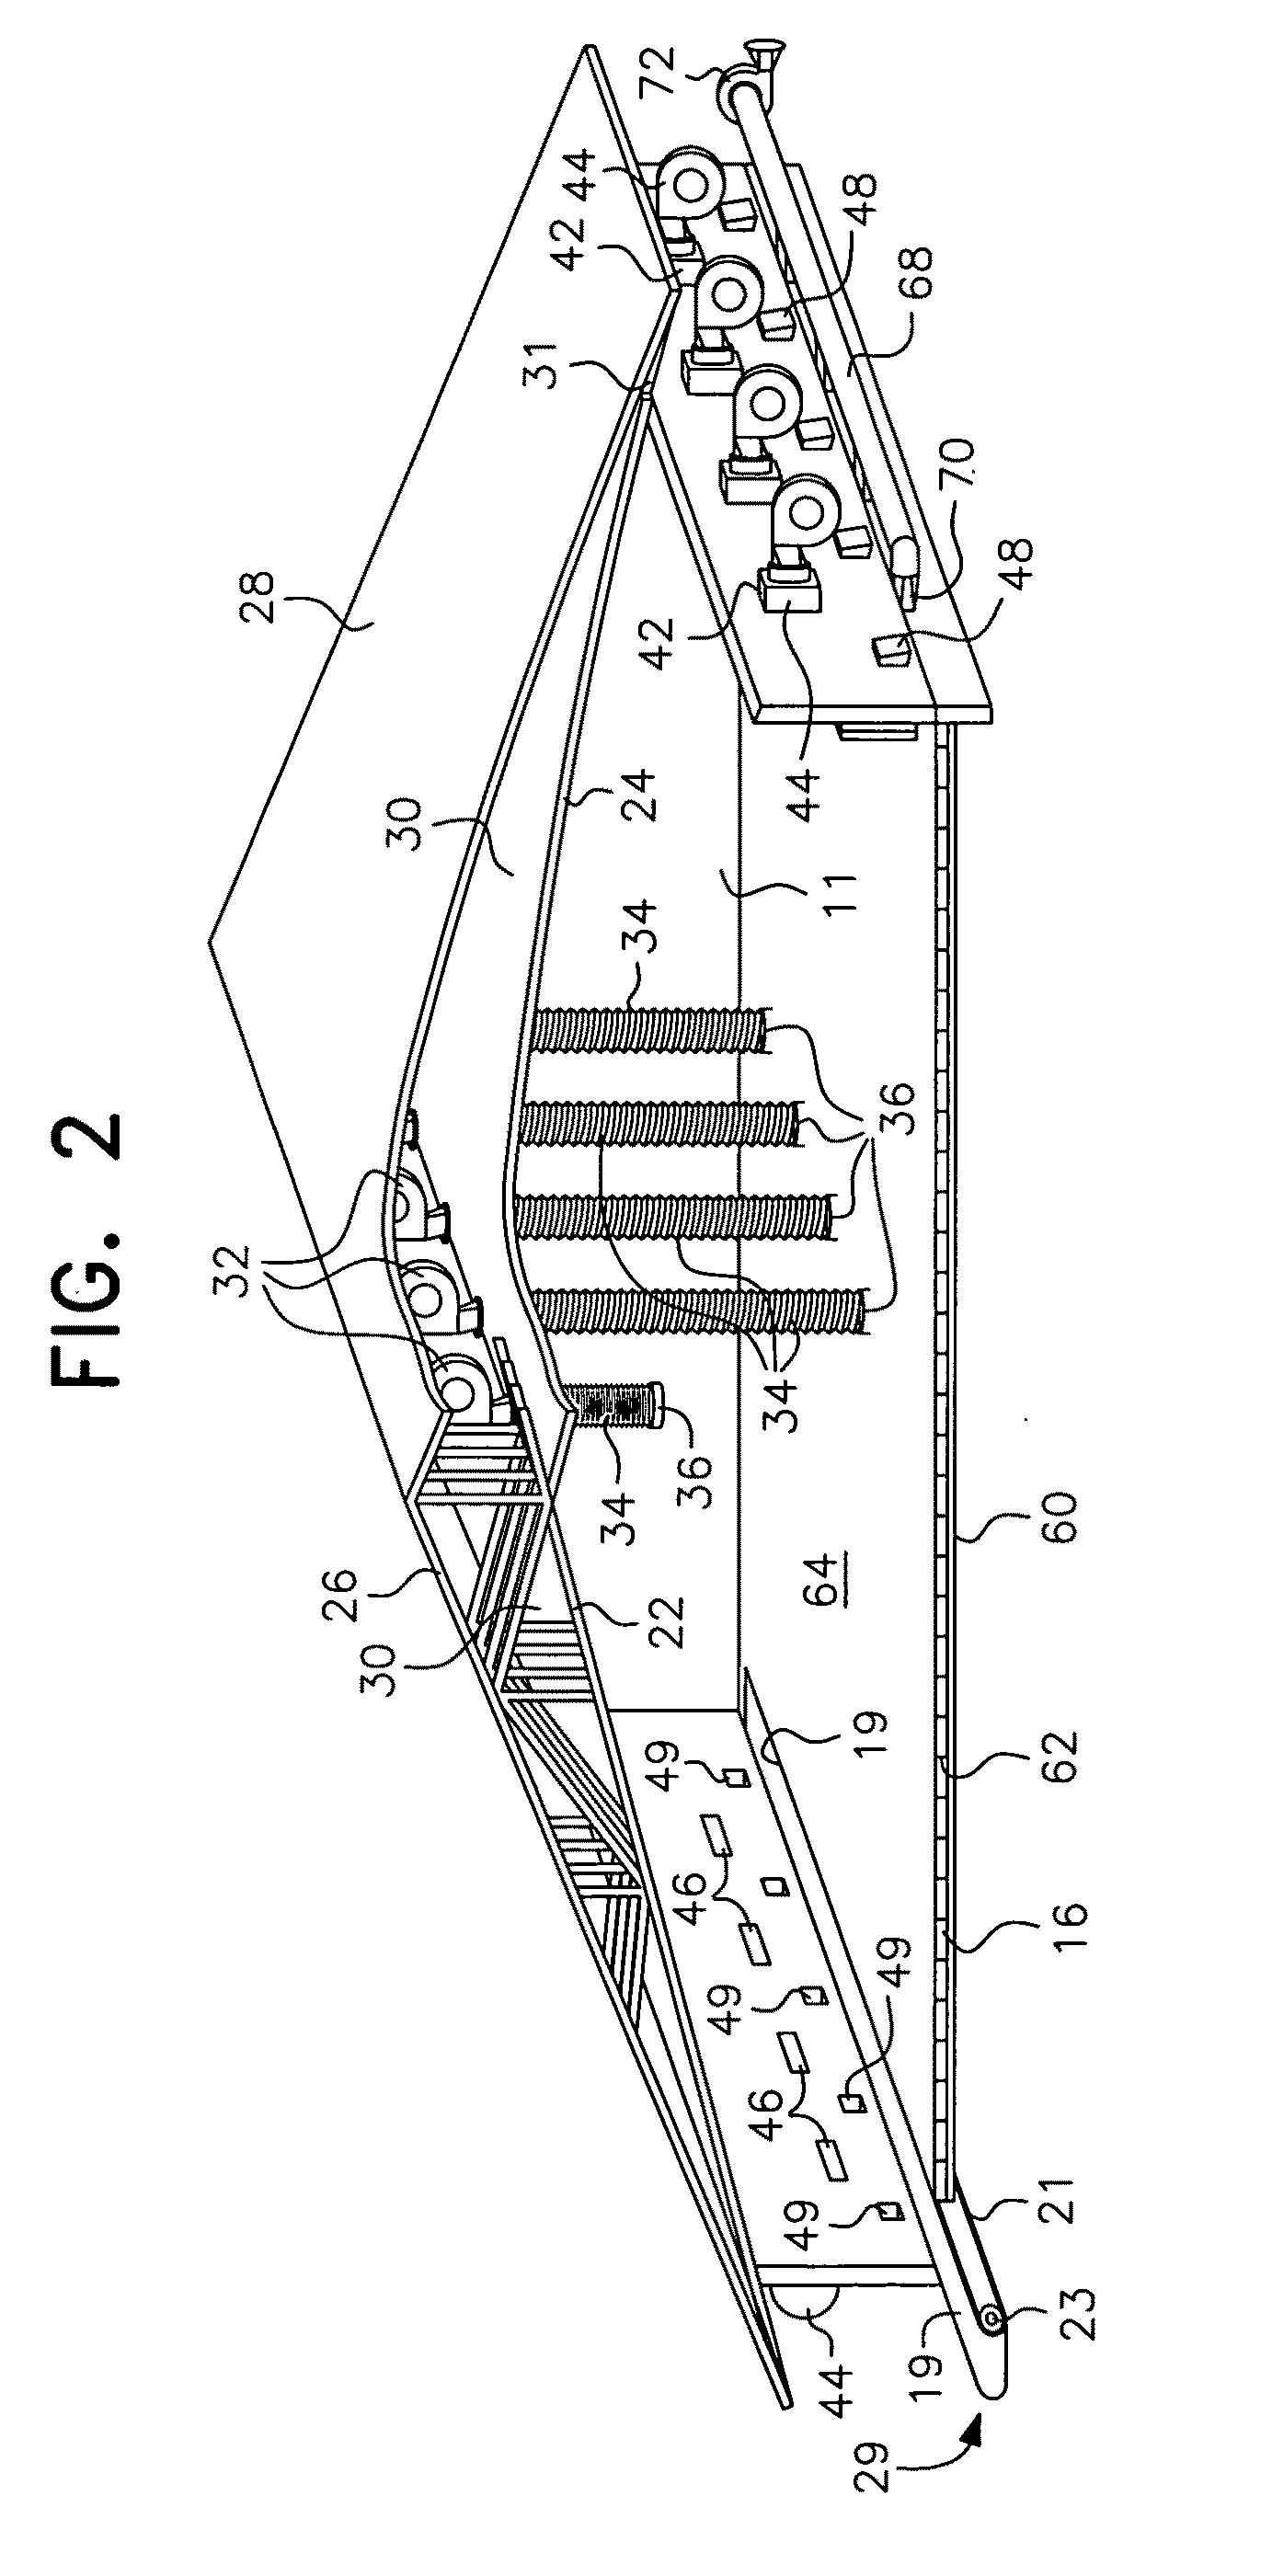 Method and apparatus for reduction of ammonia, carbon dioxide and pathogens in chicken houses